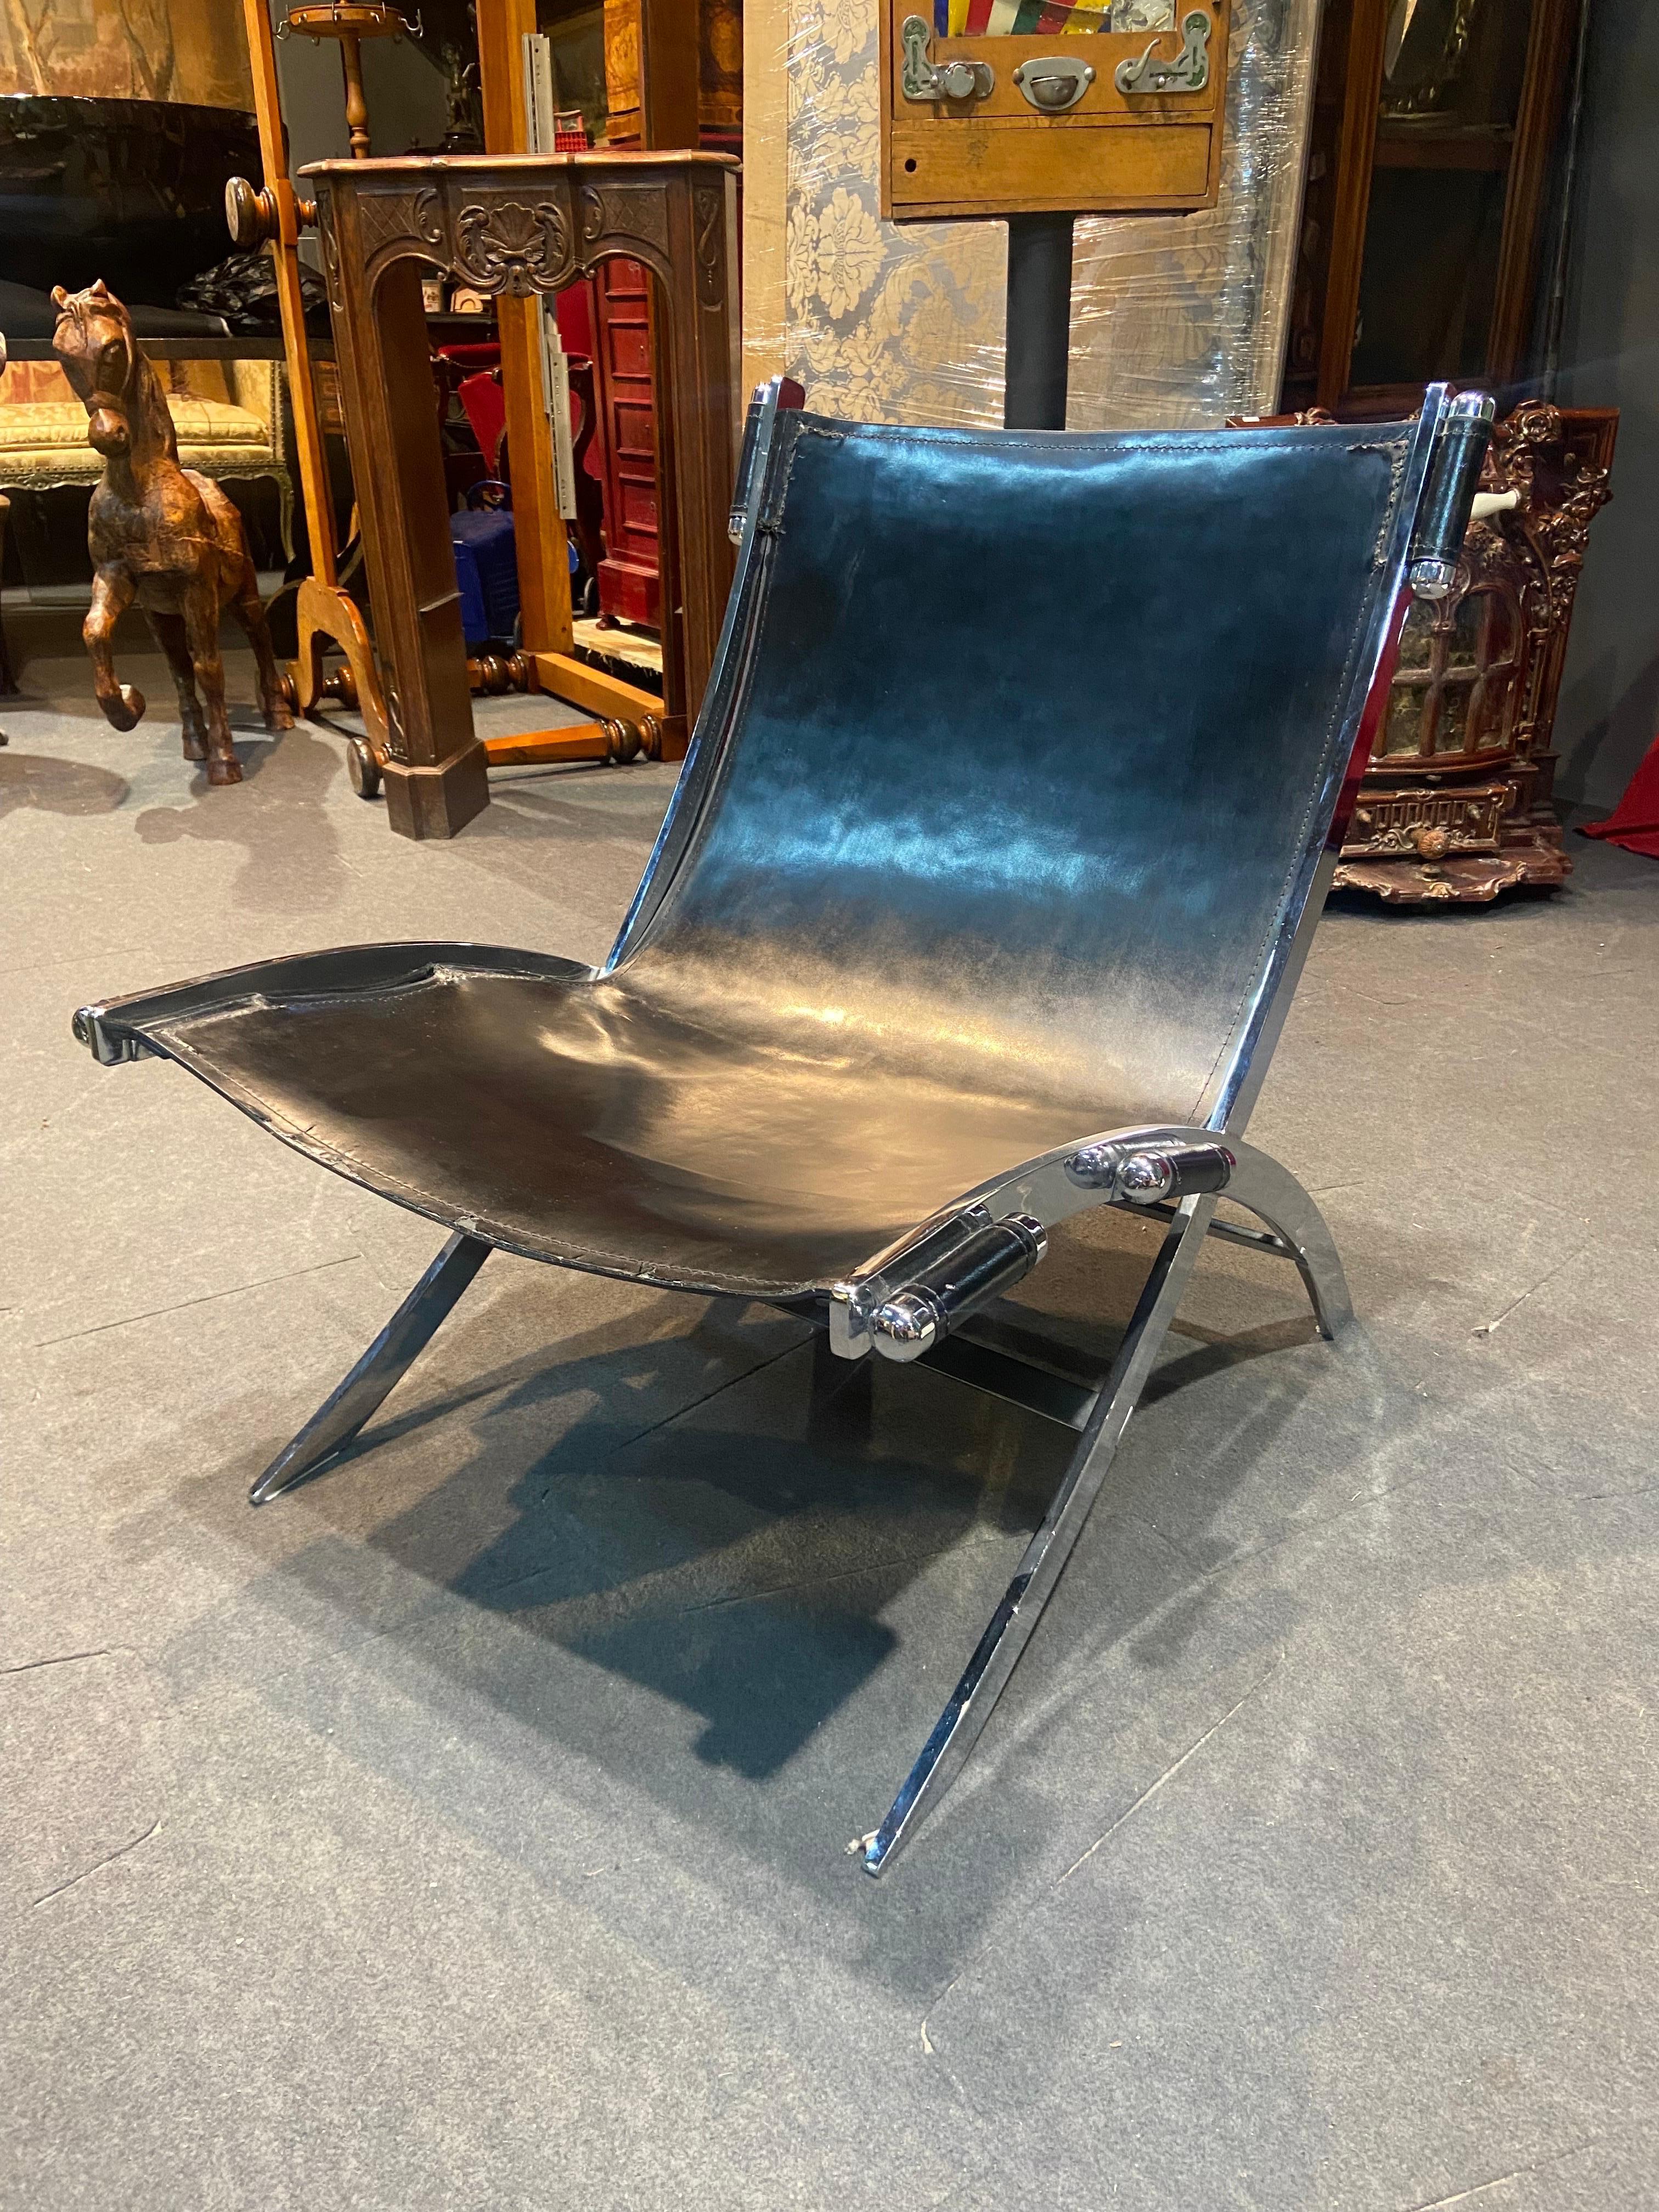 Italian post-modern scissor chair in stainless steel and black leather by Antonio Citterio for Flexform. The thick leather is stretched within the frame and held in place by six chrome cylinder shaped capsules. The leather shows some damage, as